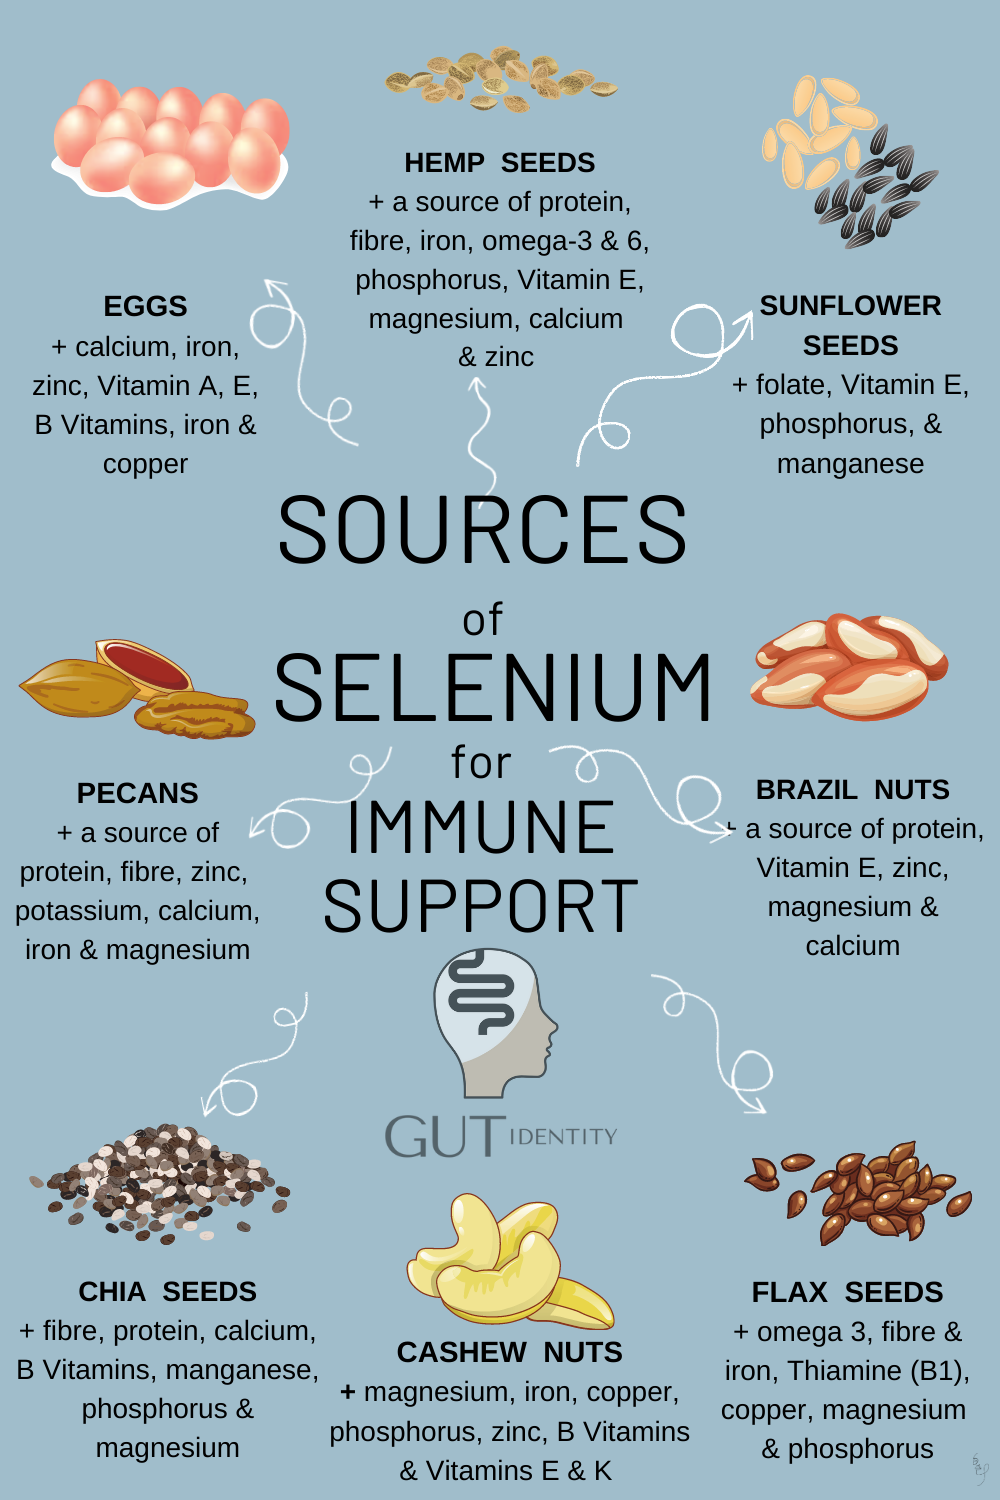 Sources of Selenium for Immune System Support